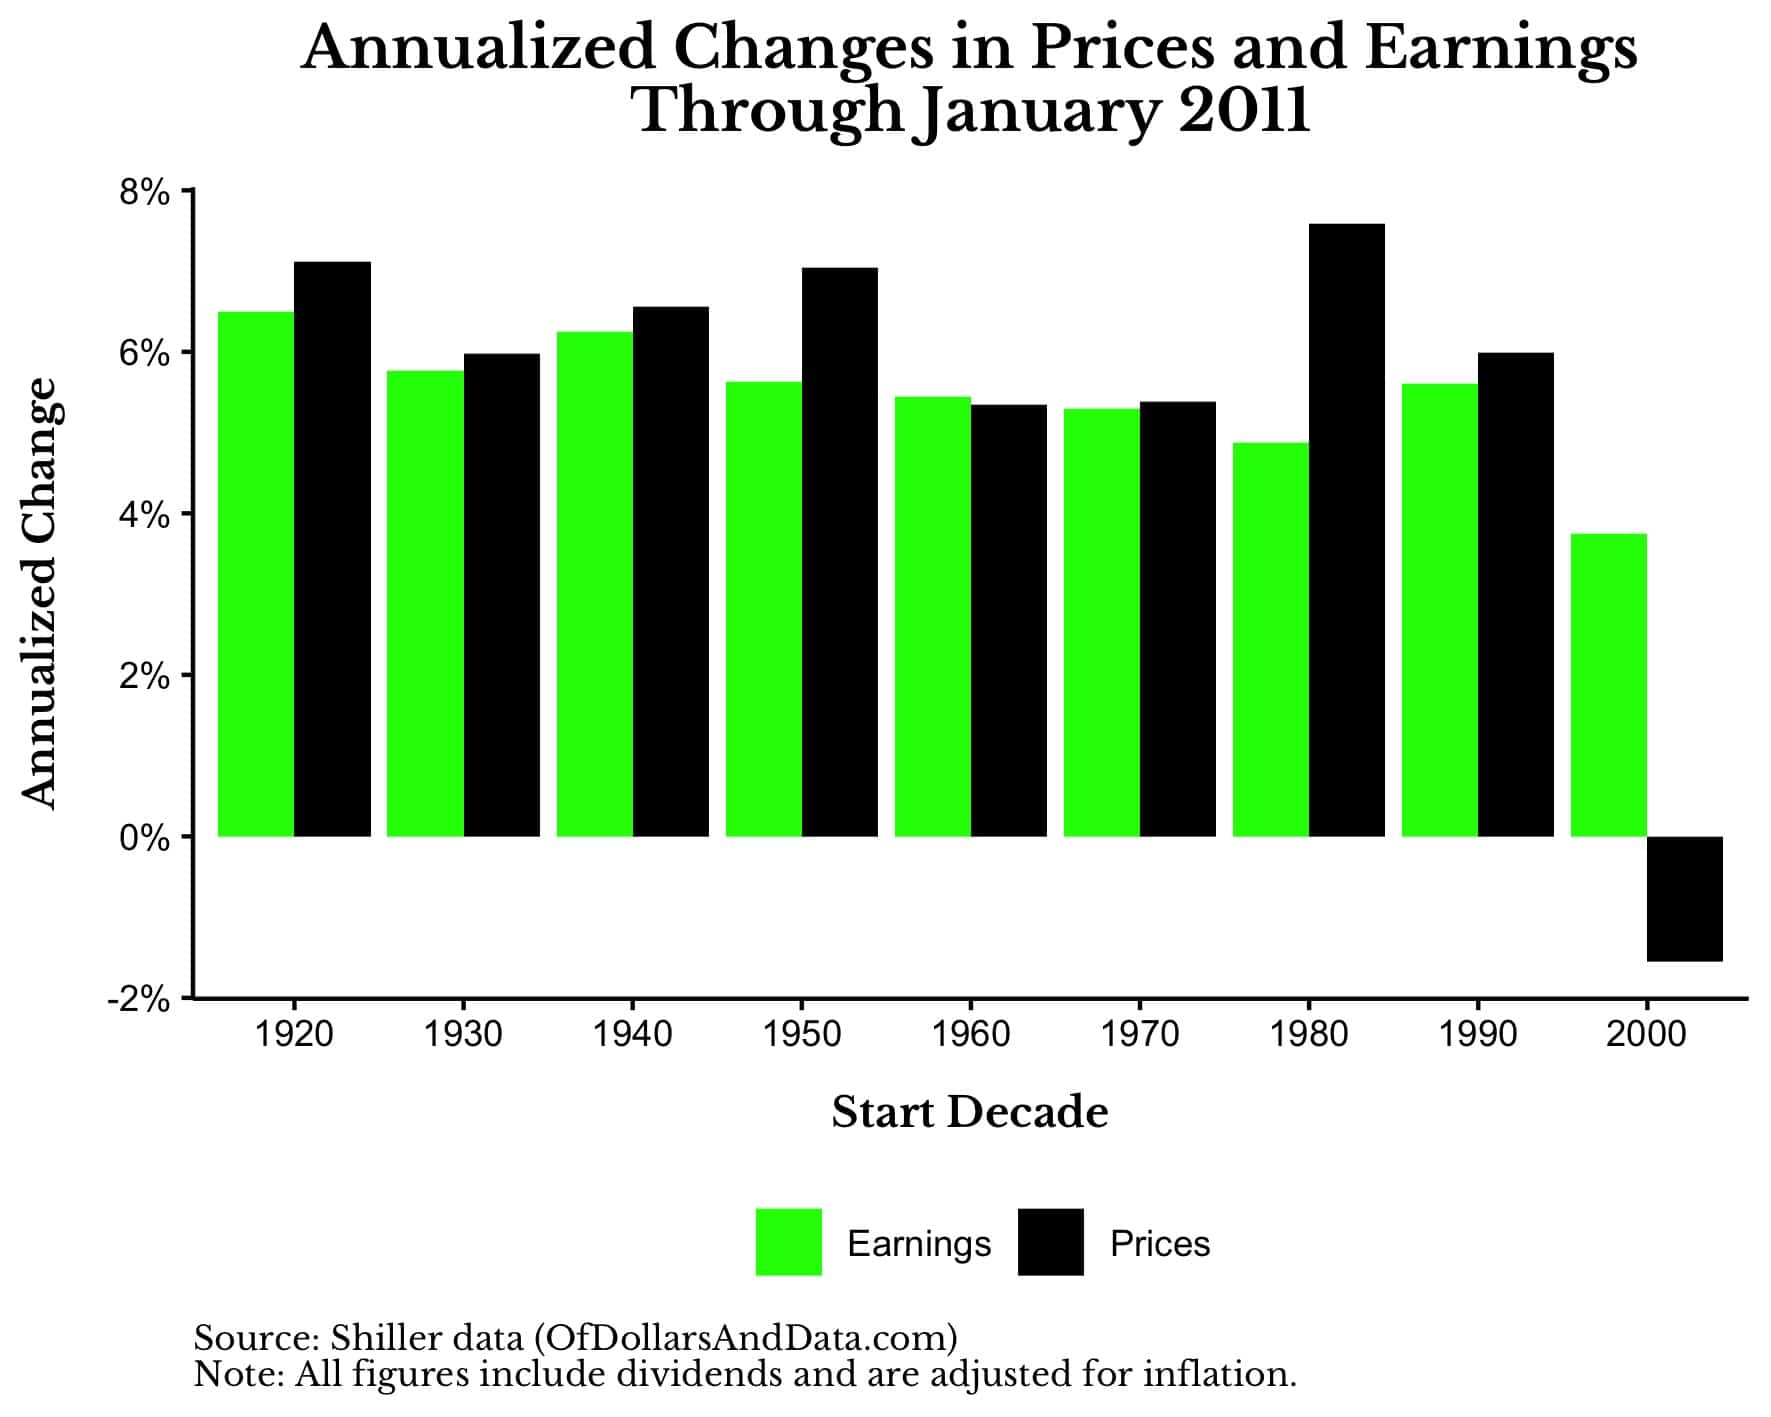 Annualized changes in prices and earnings in US stocks through January 2011.